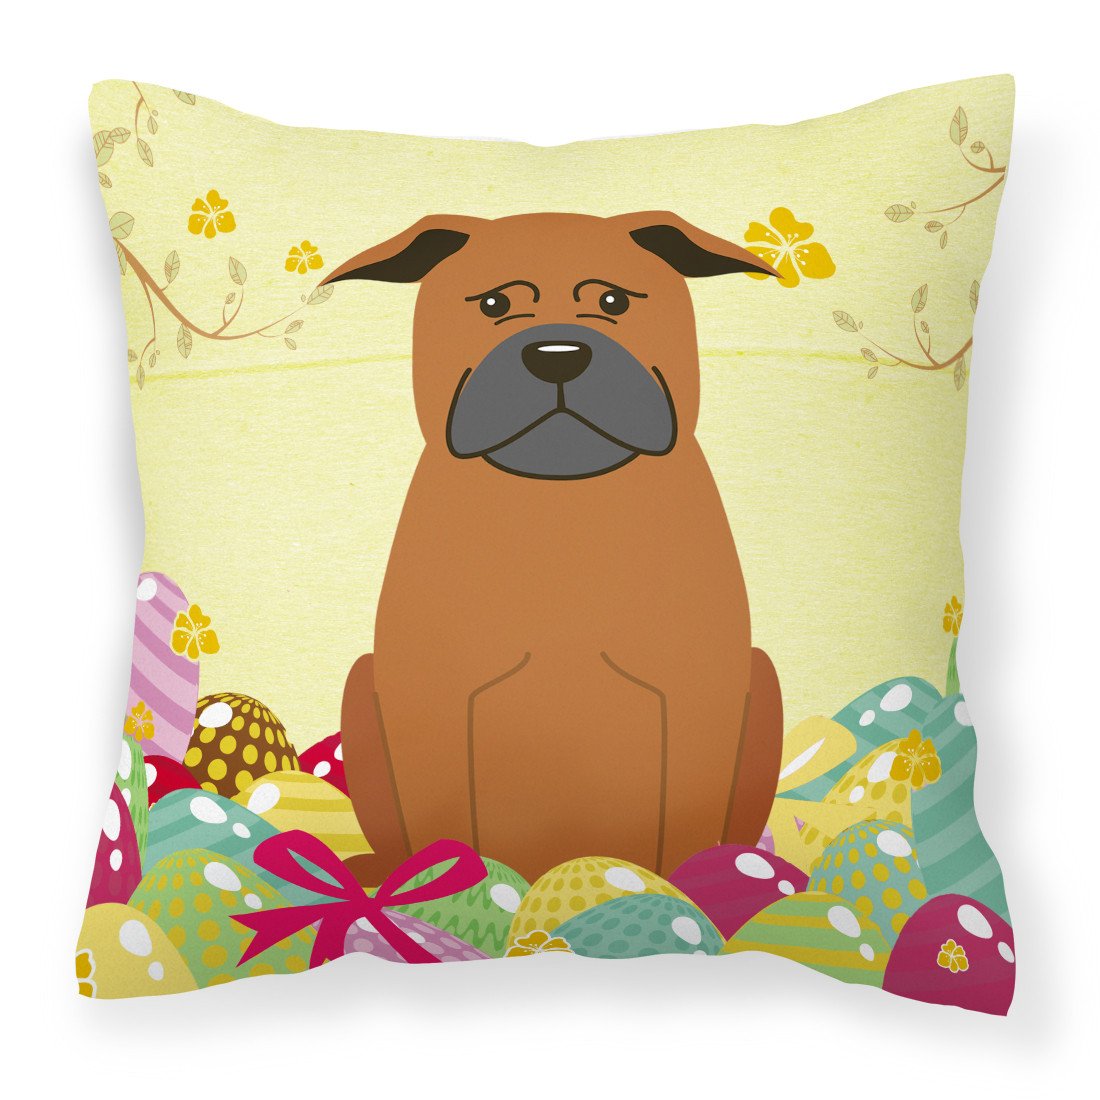 Easter Eggs Chinese Chongqing Dog Fabric Decorative Pillow BB6111PW1818 by Caroline's Treasures